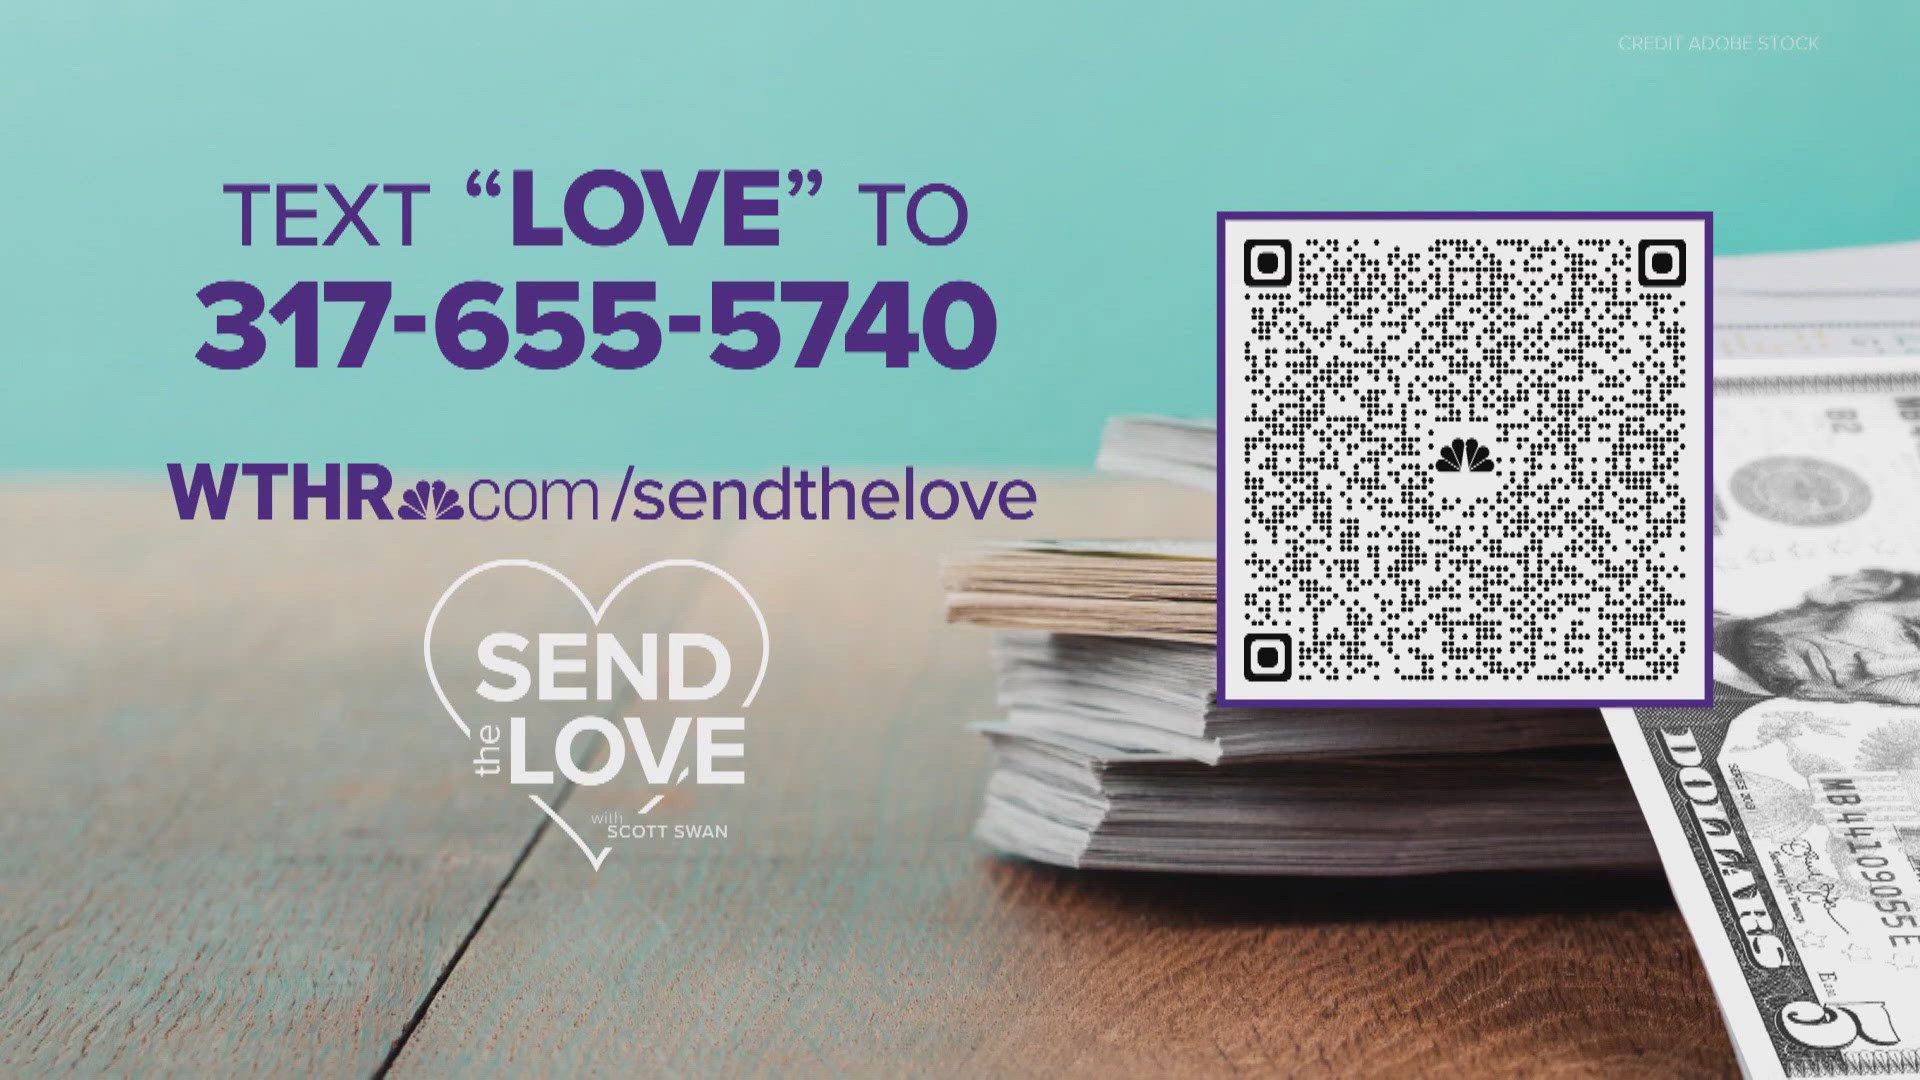 If you'd be willing to donate $5, text the word "LOVE" to 317-655-5740.